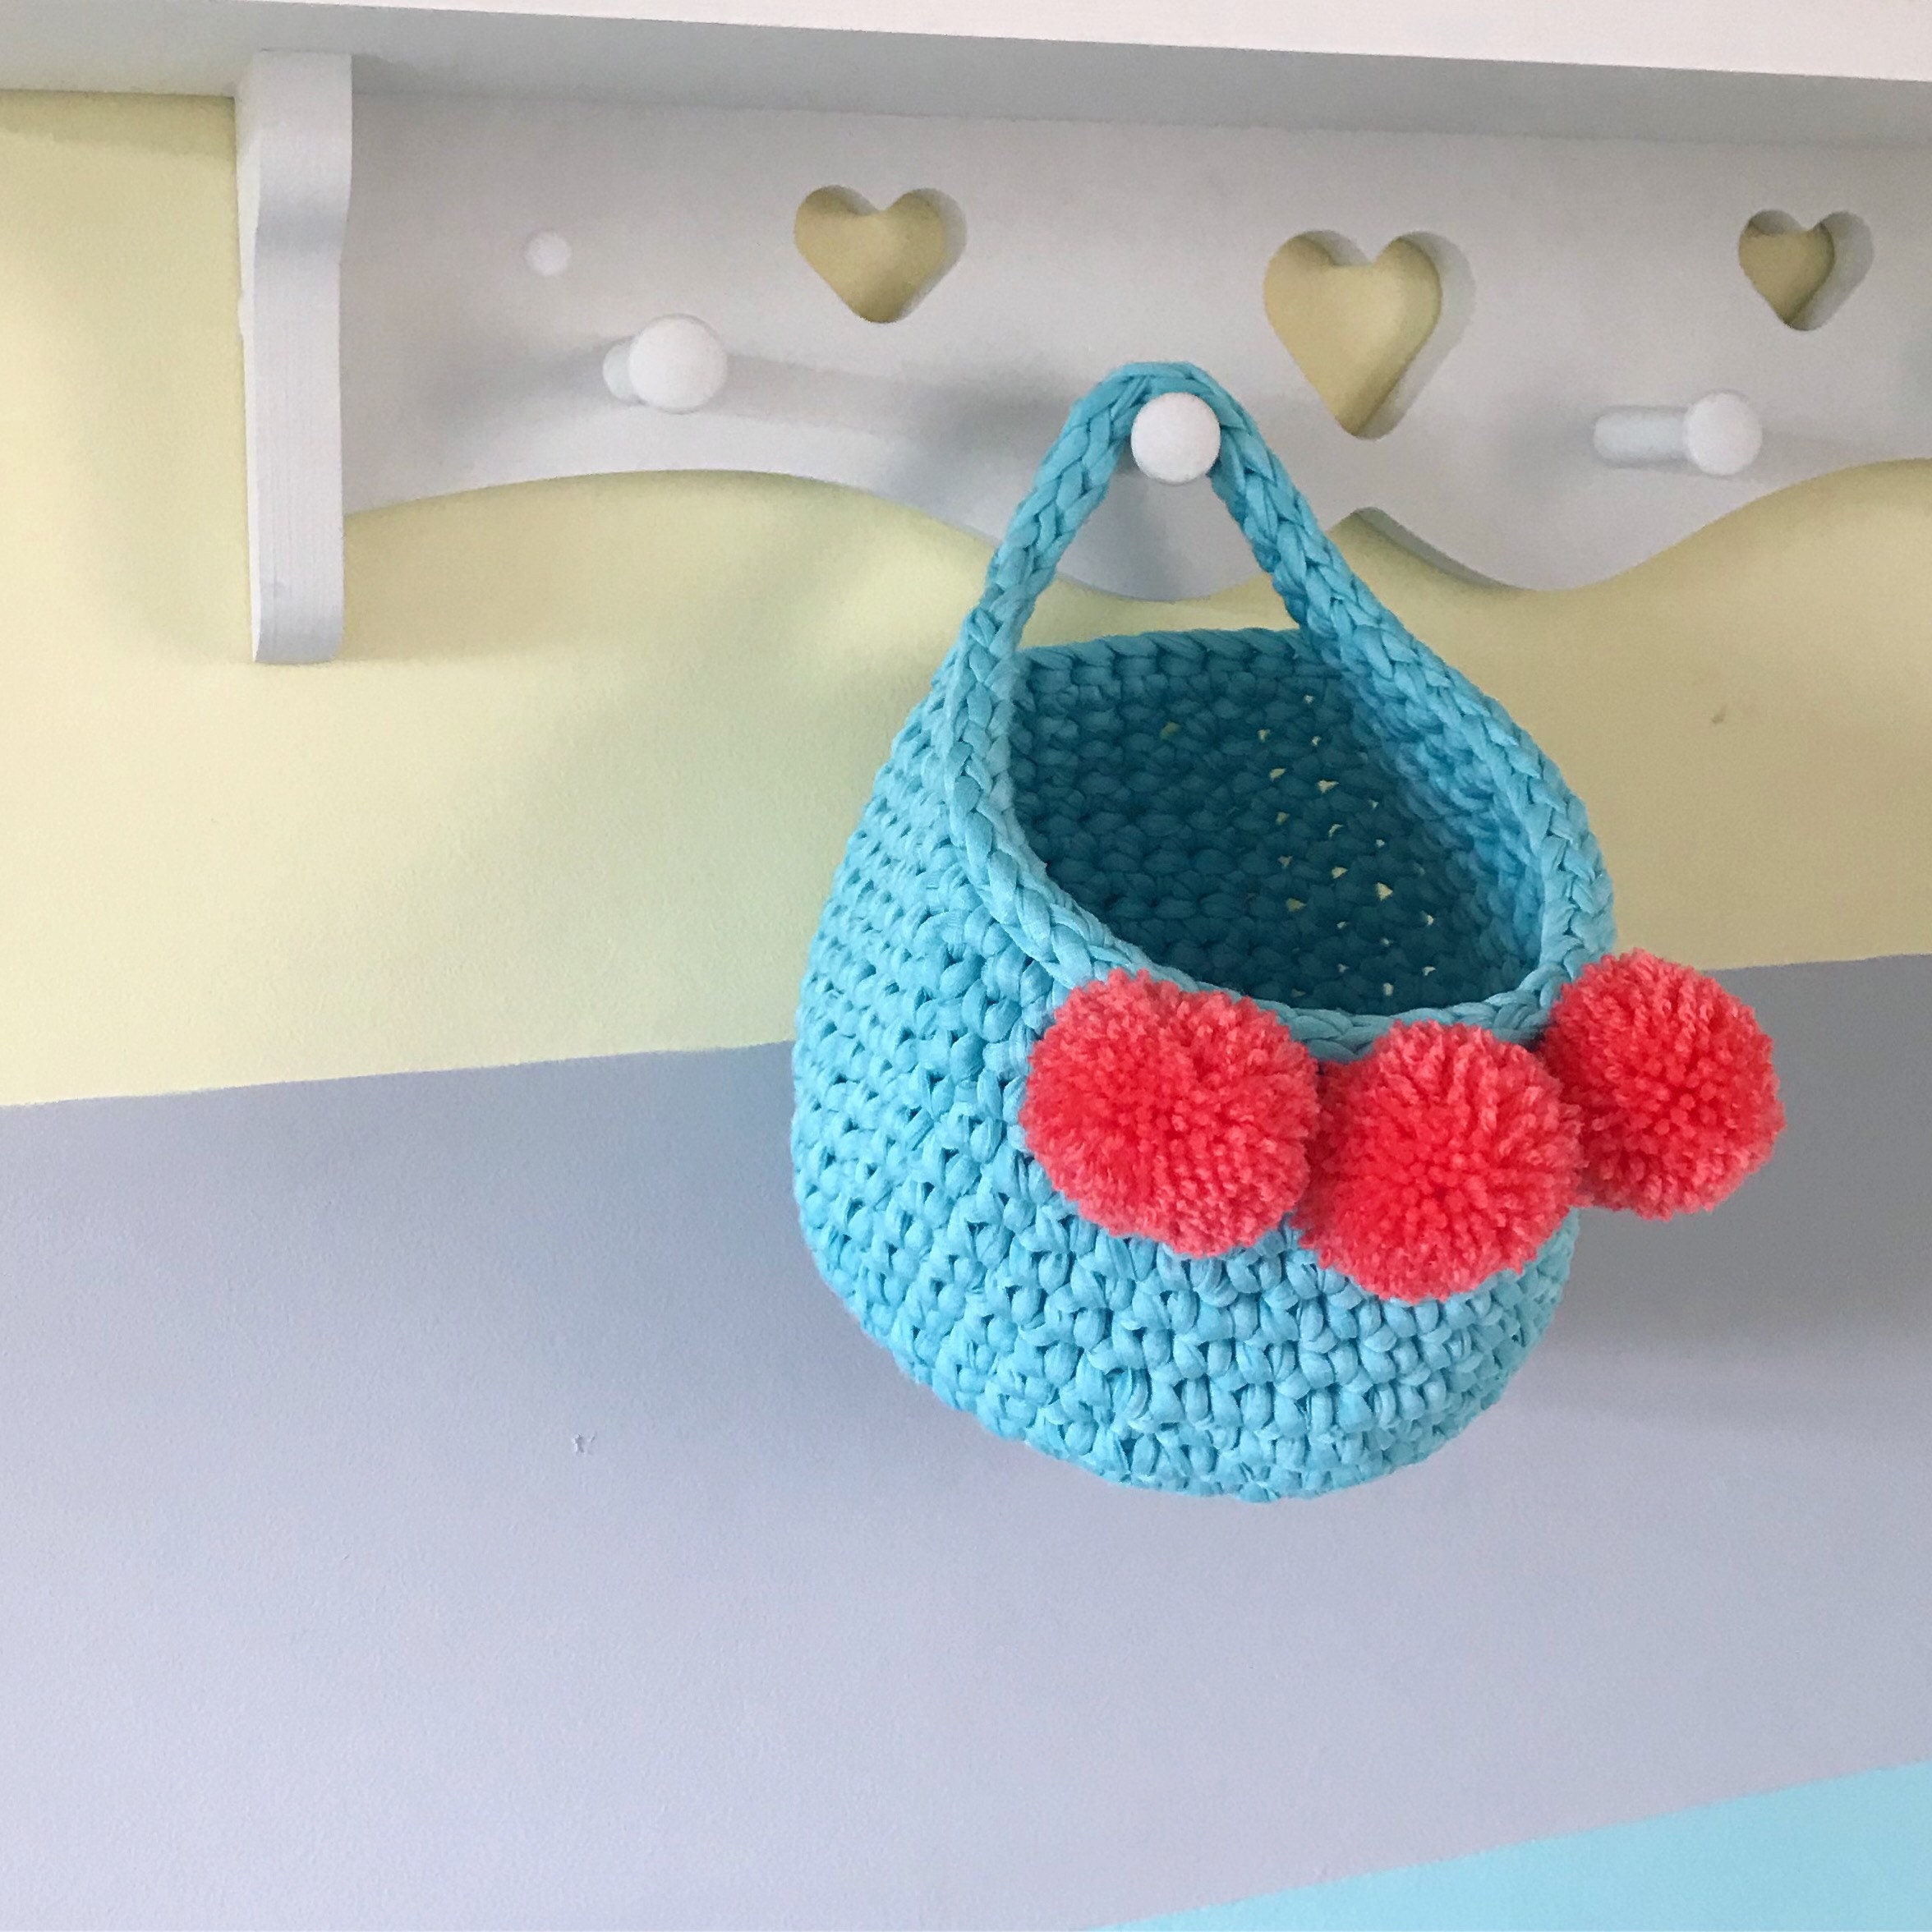 Crochet Nursery Wall Bag Baby Shower Gift Recycled Home | Etsy